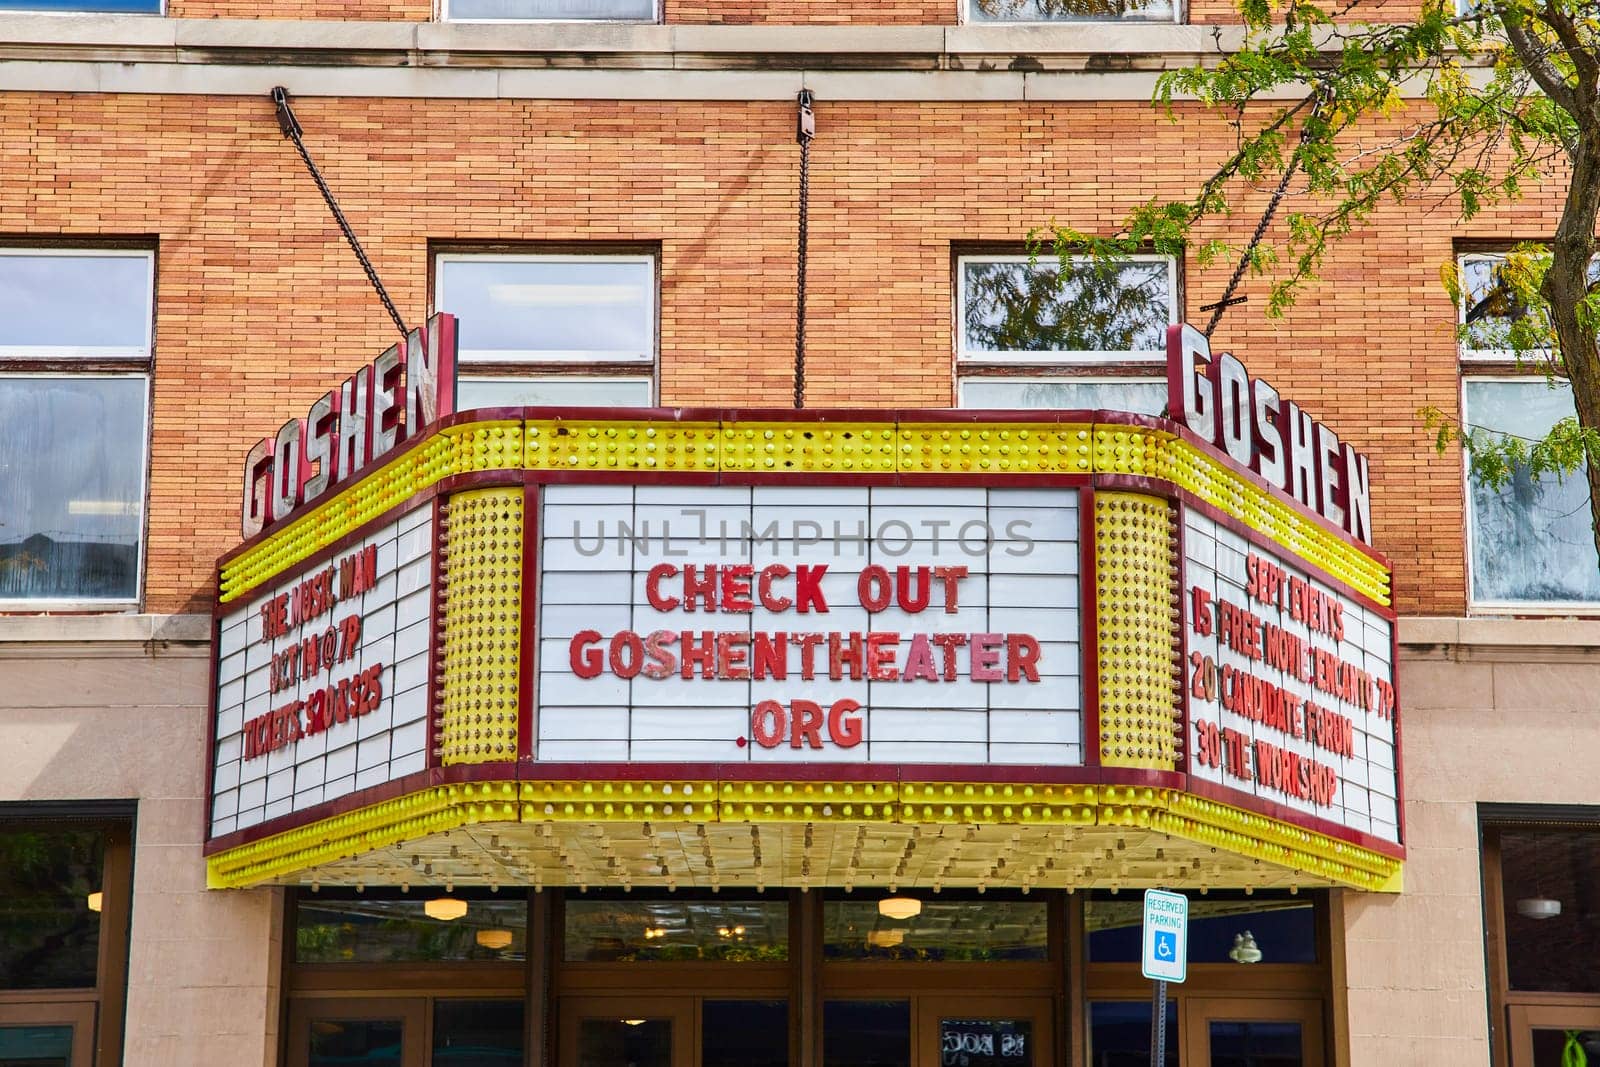 Goshen theater sign and front entrance on bright, sunny summer day, Indiana by njproductions